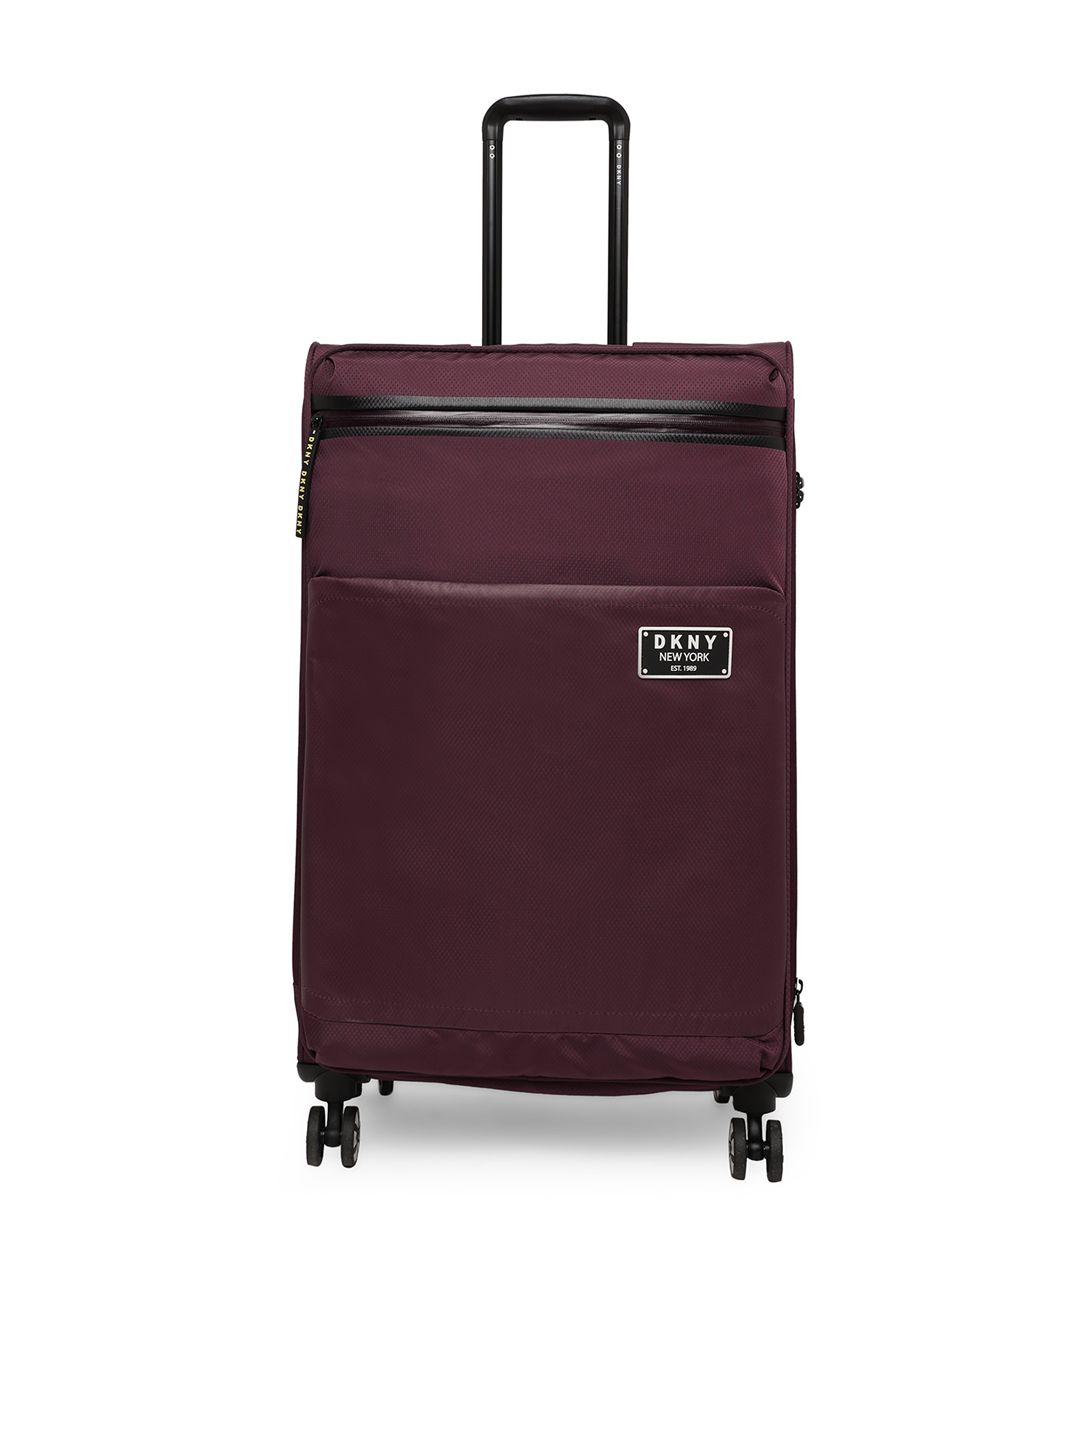 DKNY Burgundy Textured GLOBE TROTTER Soft-Sided Medium Trolley Suitcase Price in India